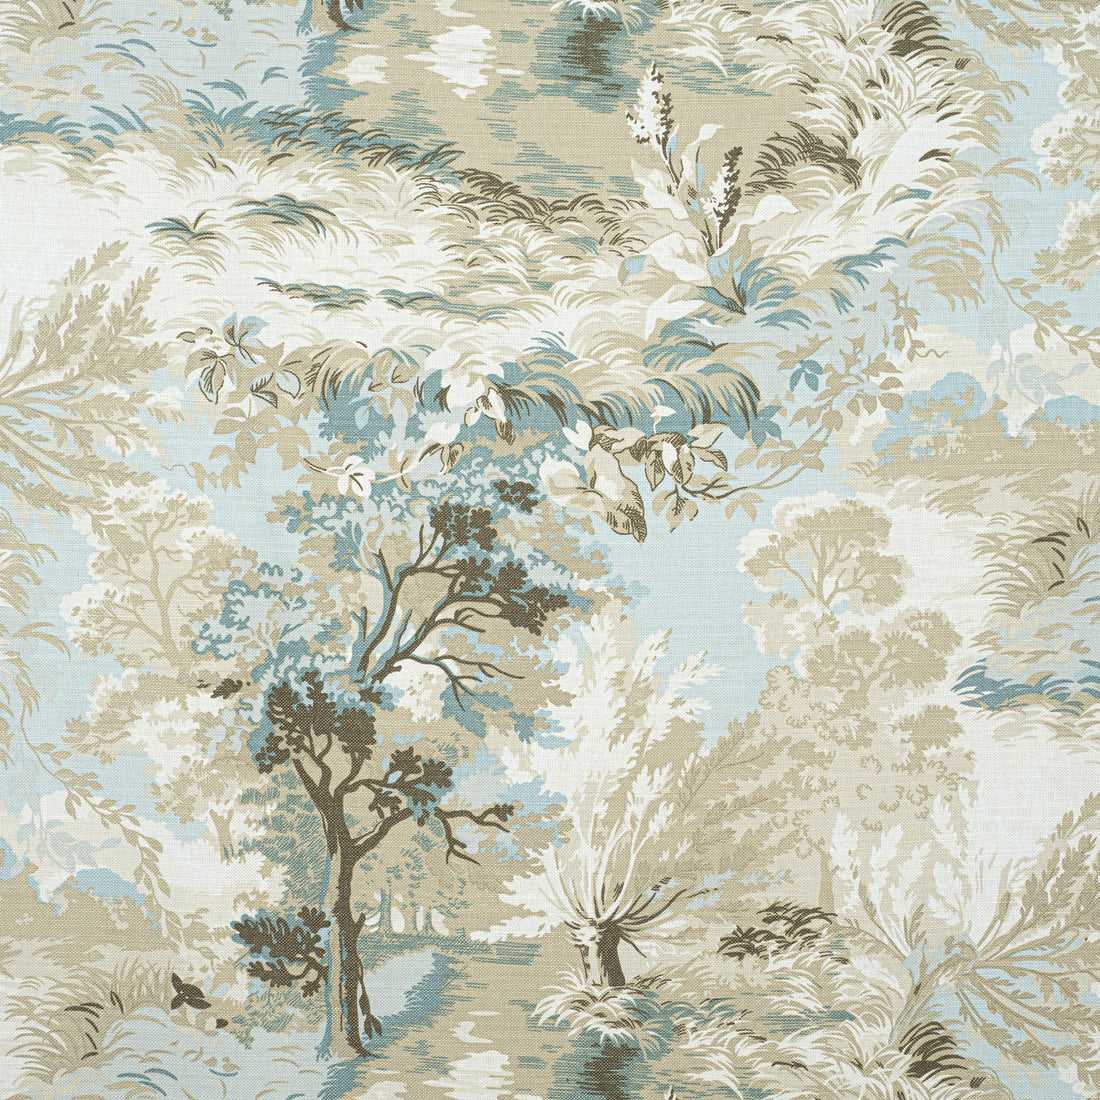 Lincoln Toile fabric in beige and spa blue color - pattern number F910865 - by Thibaut in the Heritage collection